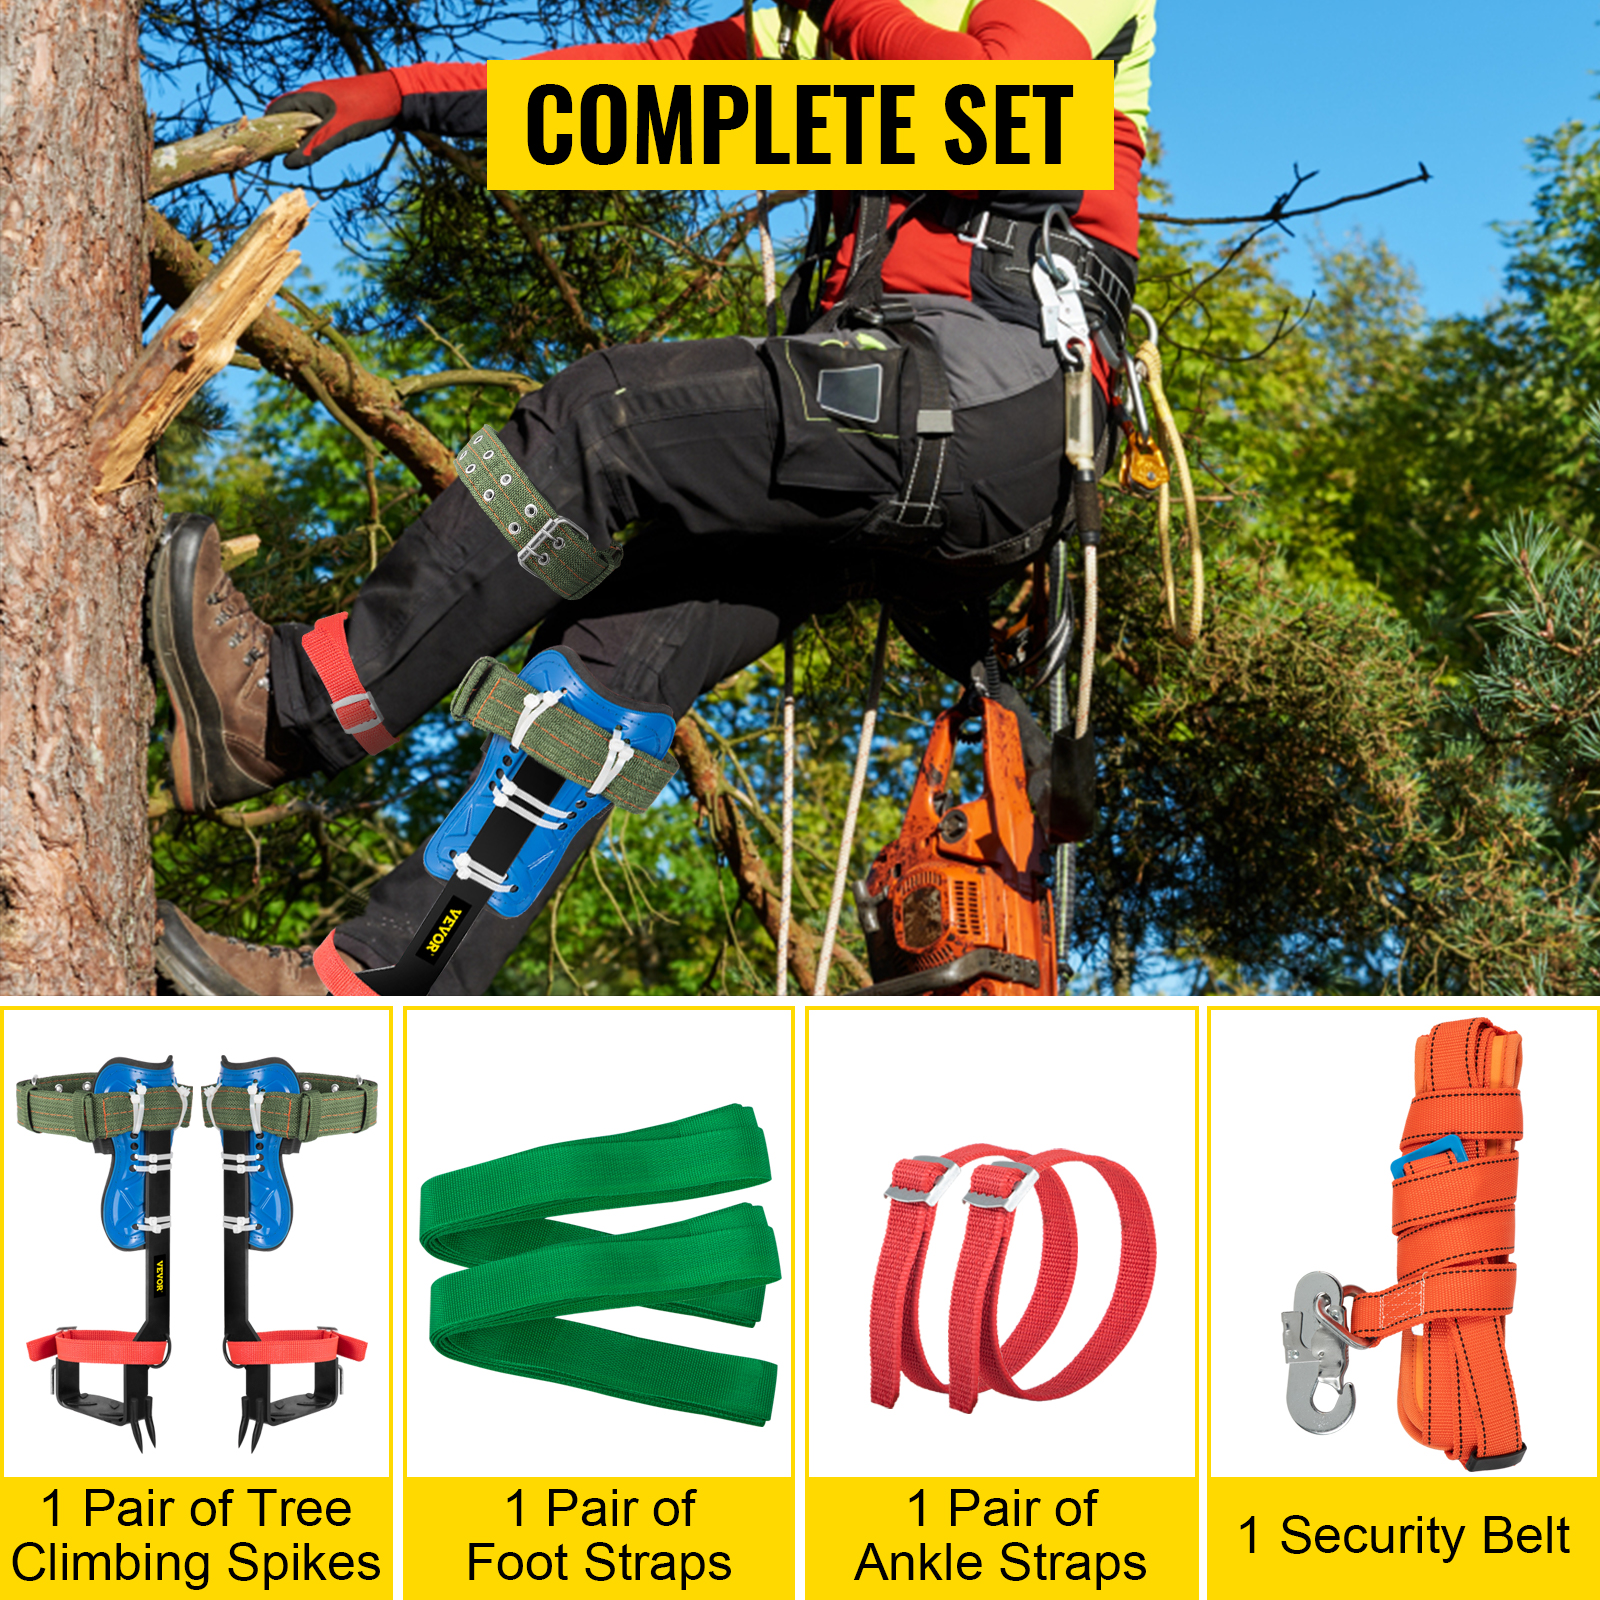 VEVOR Tree Climbing Spikes, 4 in 1 Alloy Metal Adjustable Pole Climbing  Spurs, w/Security Belt & Foot Ankle Straps, Arborist Equipment for Climbers,  Logging, Hunting Observation, Fruit Picking